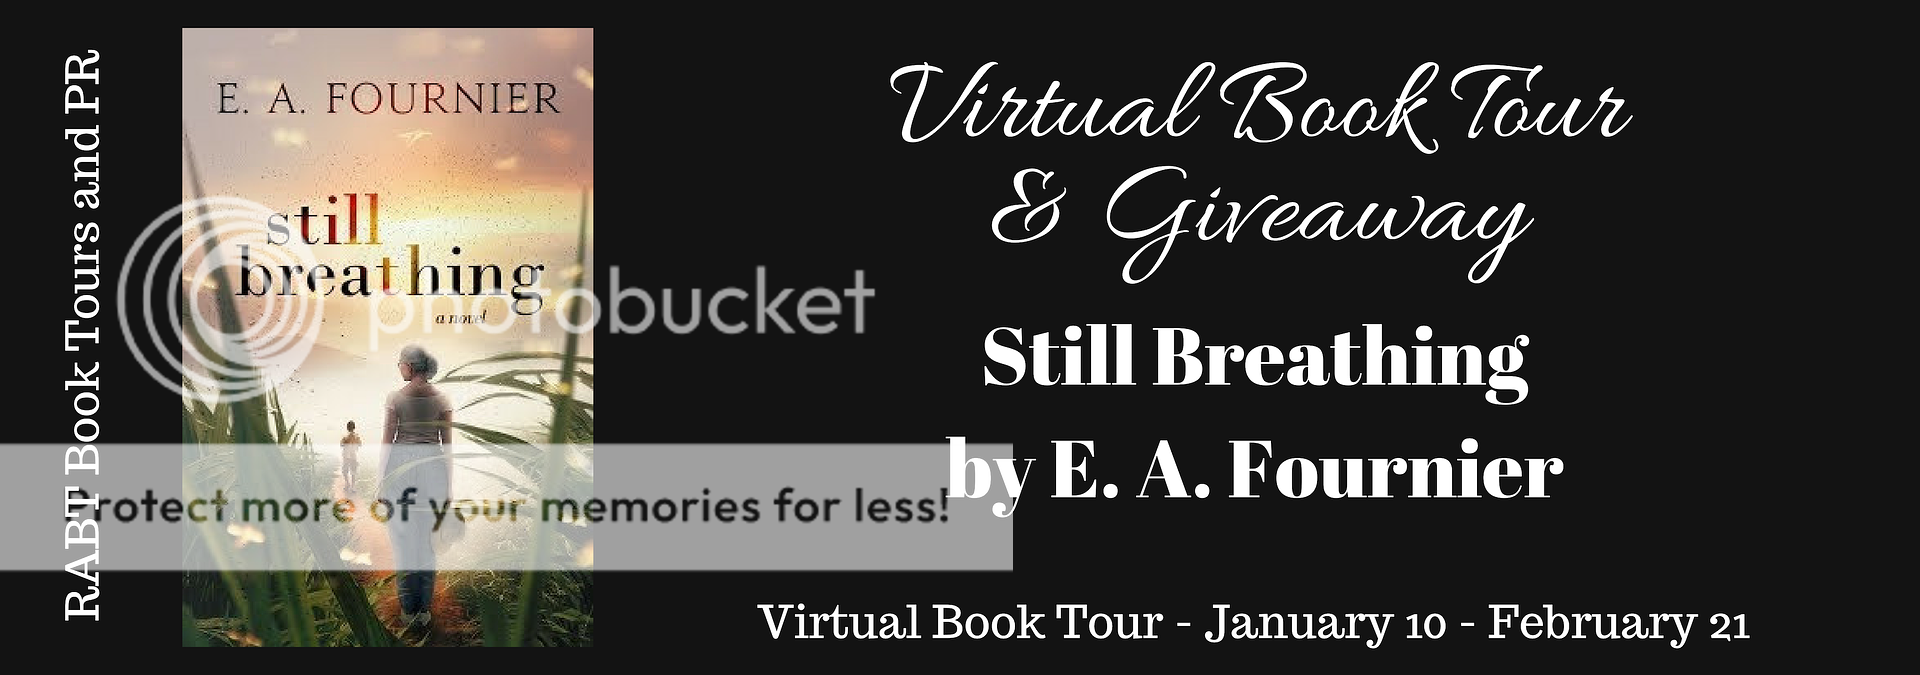 Virtual Book Tour: Still Breathing by E.A. Fournier @gammera #interview #giveaway #womensfiction @RABTBookTours